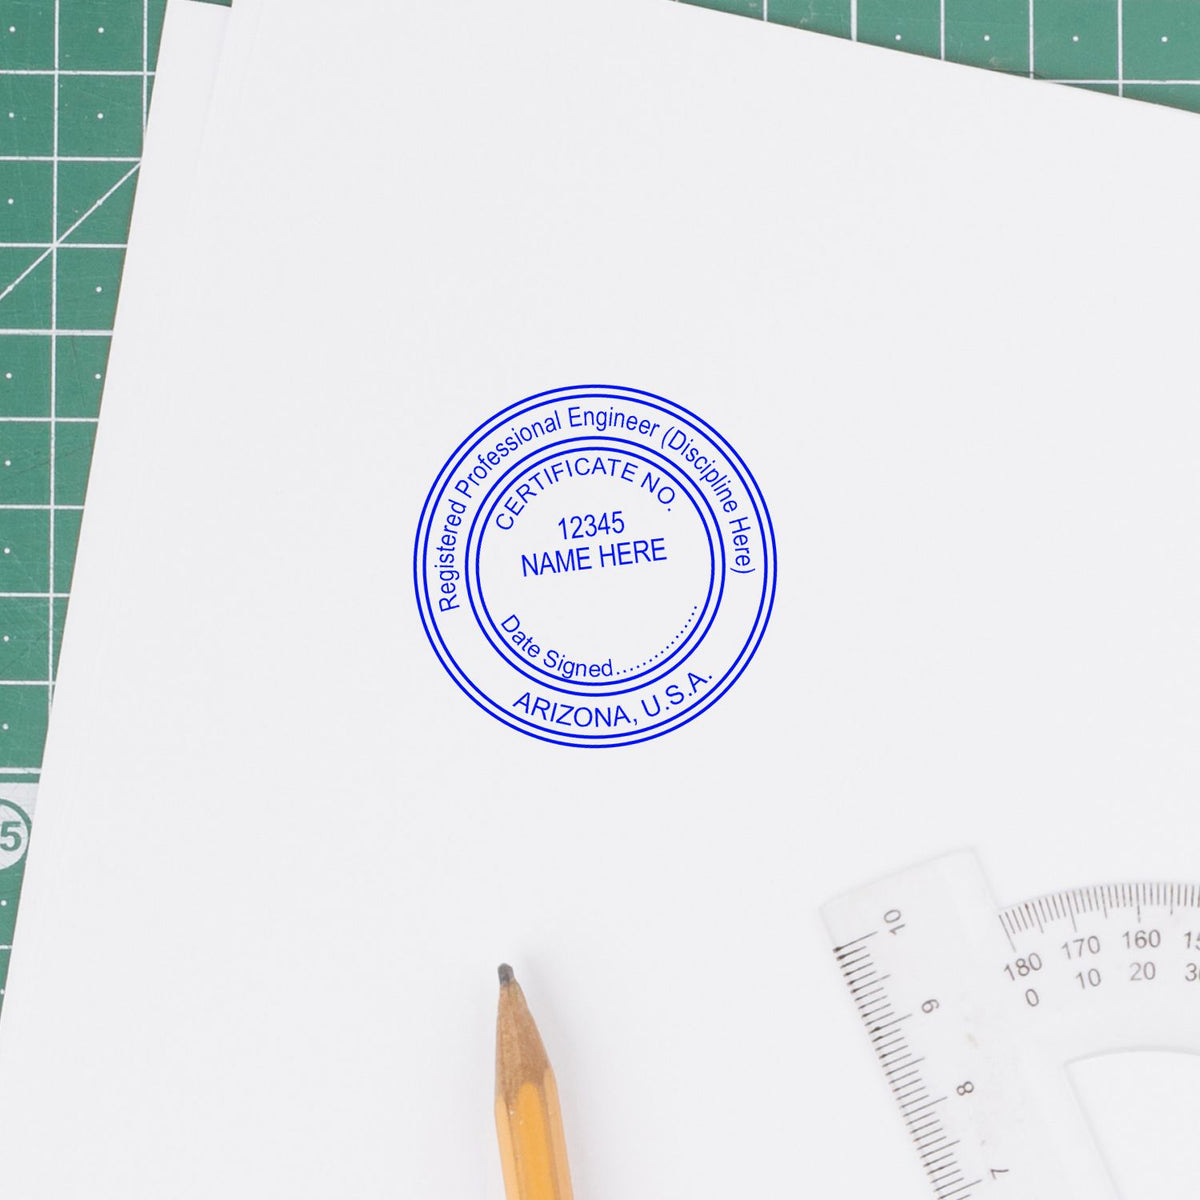 This paper is stamped with a sample imprint of the Digital Arizona PE Stamp and Electronic Seal for Arizona Engineer, signifying its quality and reliability.